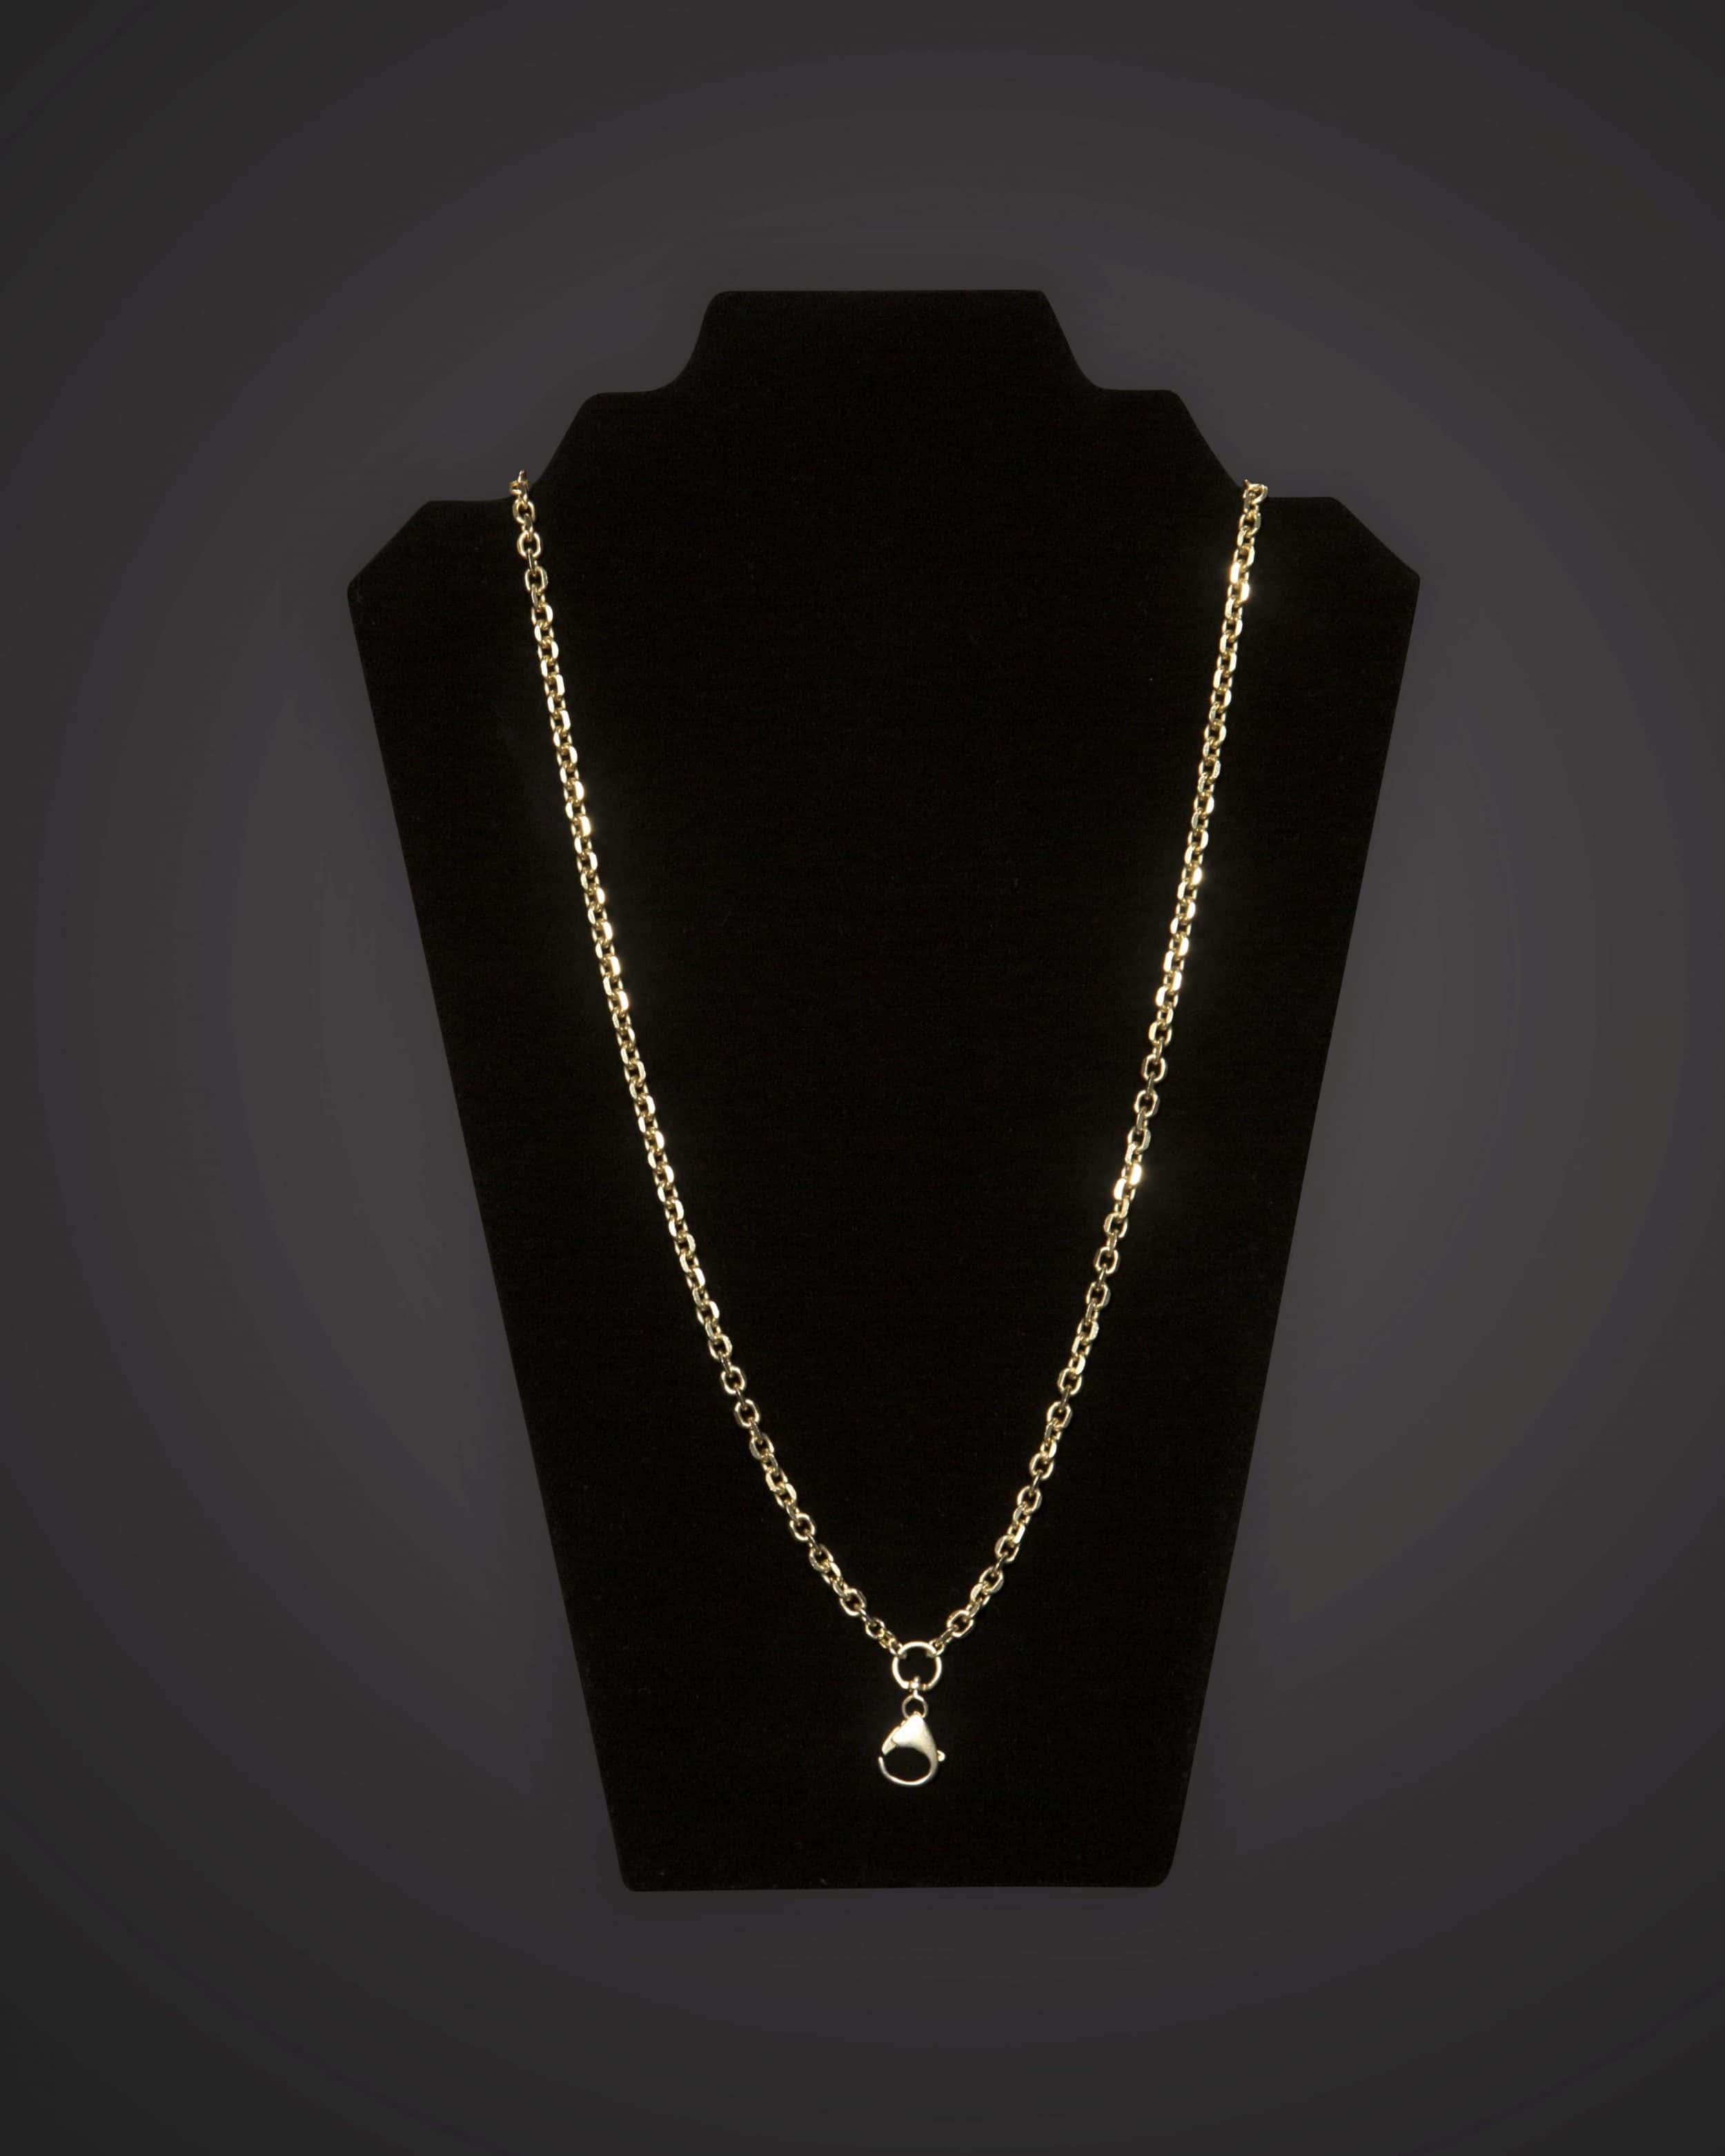 Pectoral Chain - Geo - Short - Gold Plated